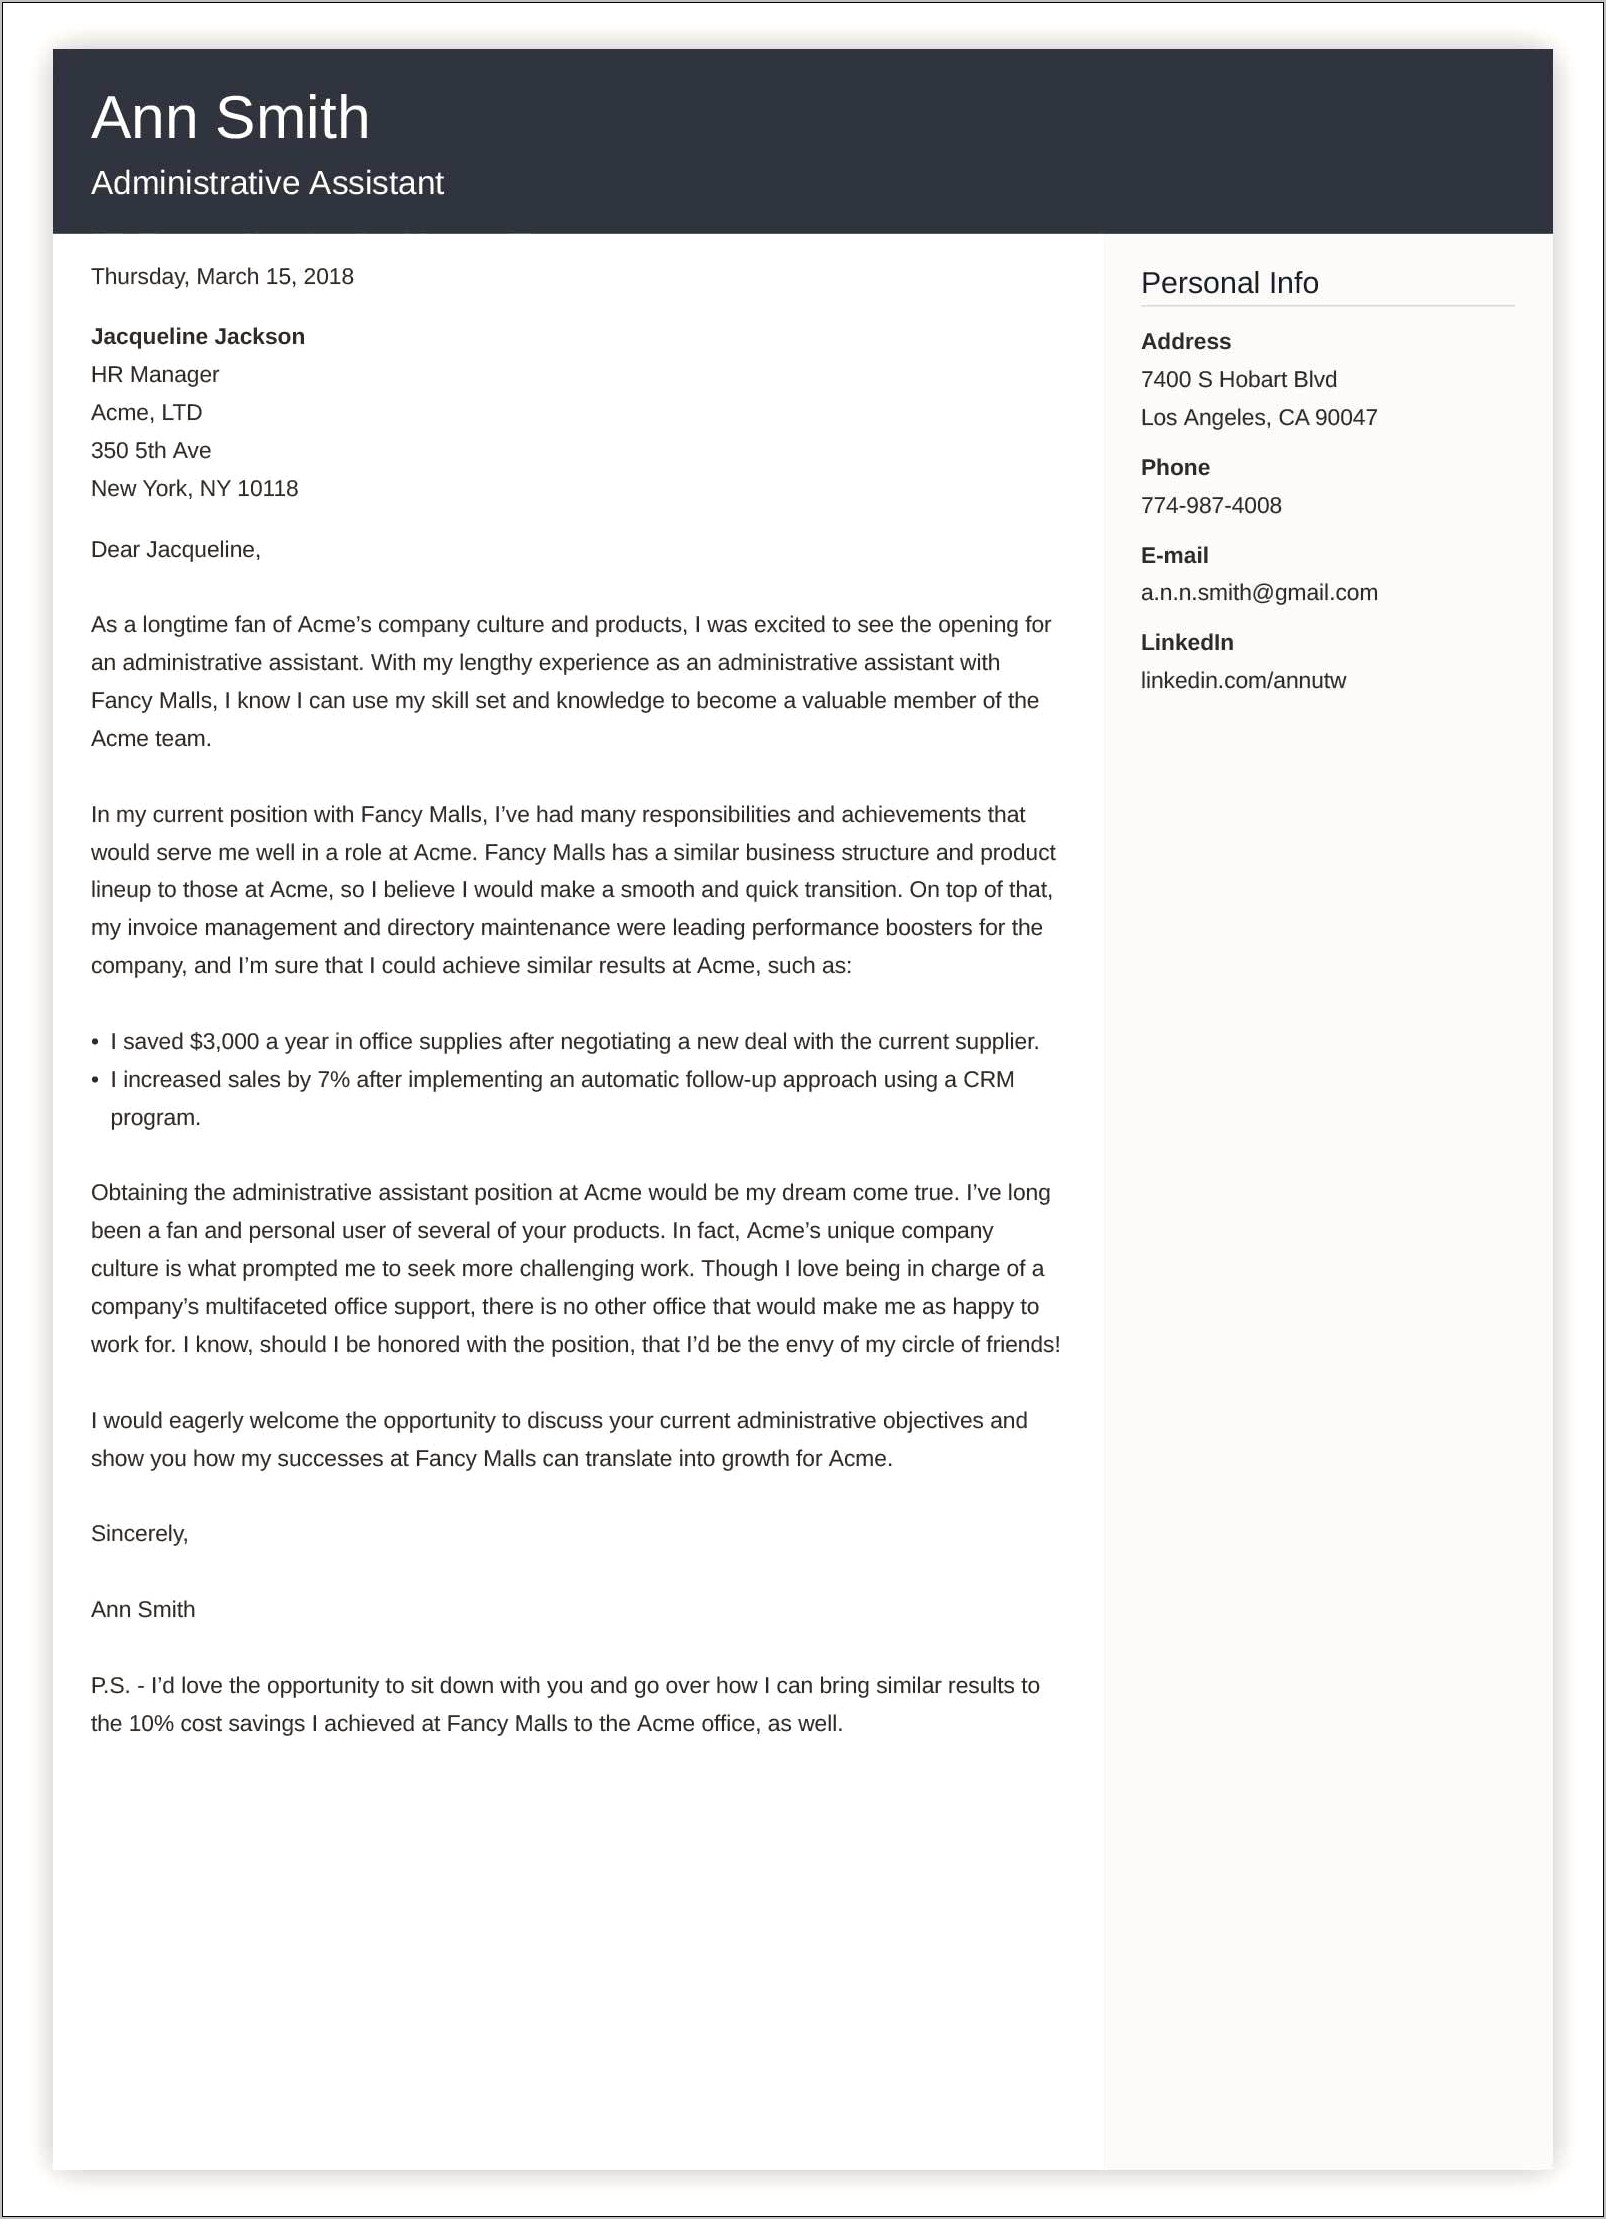 Free Resume Cover Letter Examples For Administrative Assistants